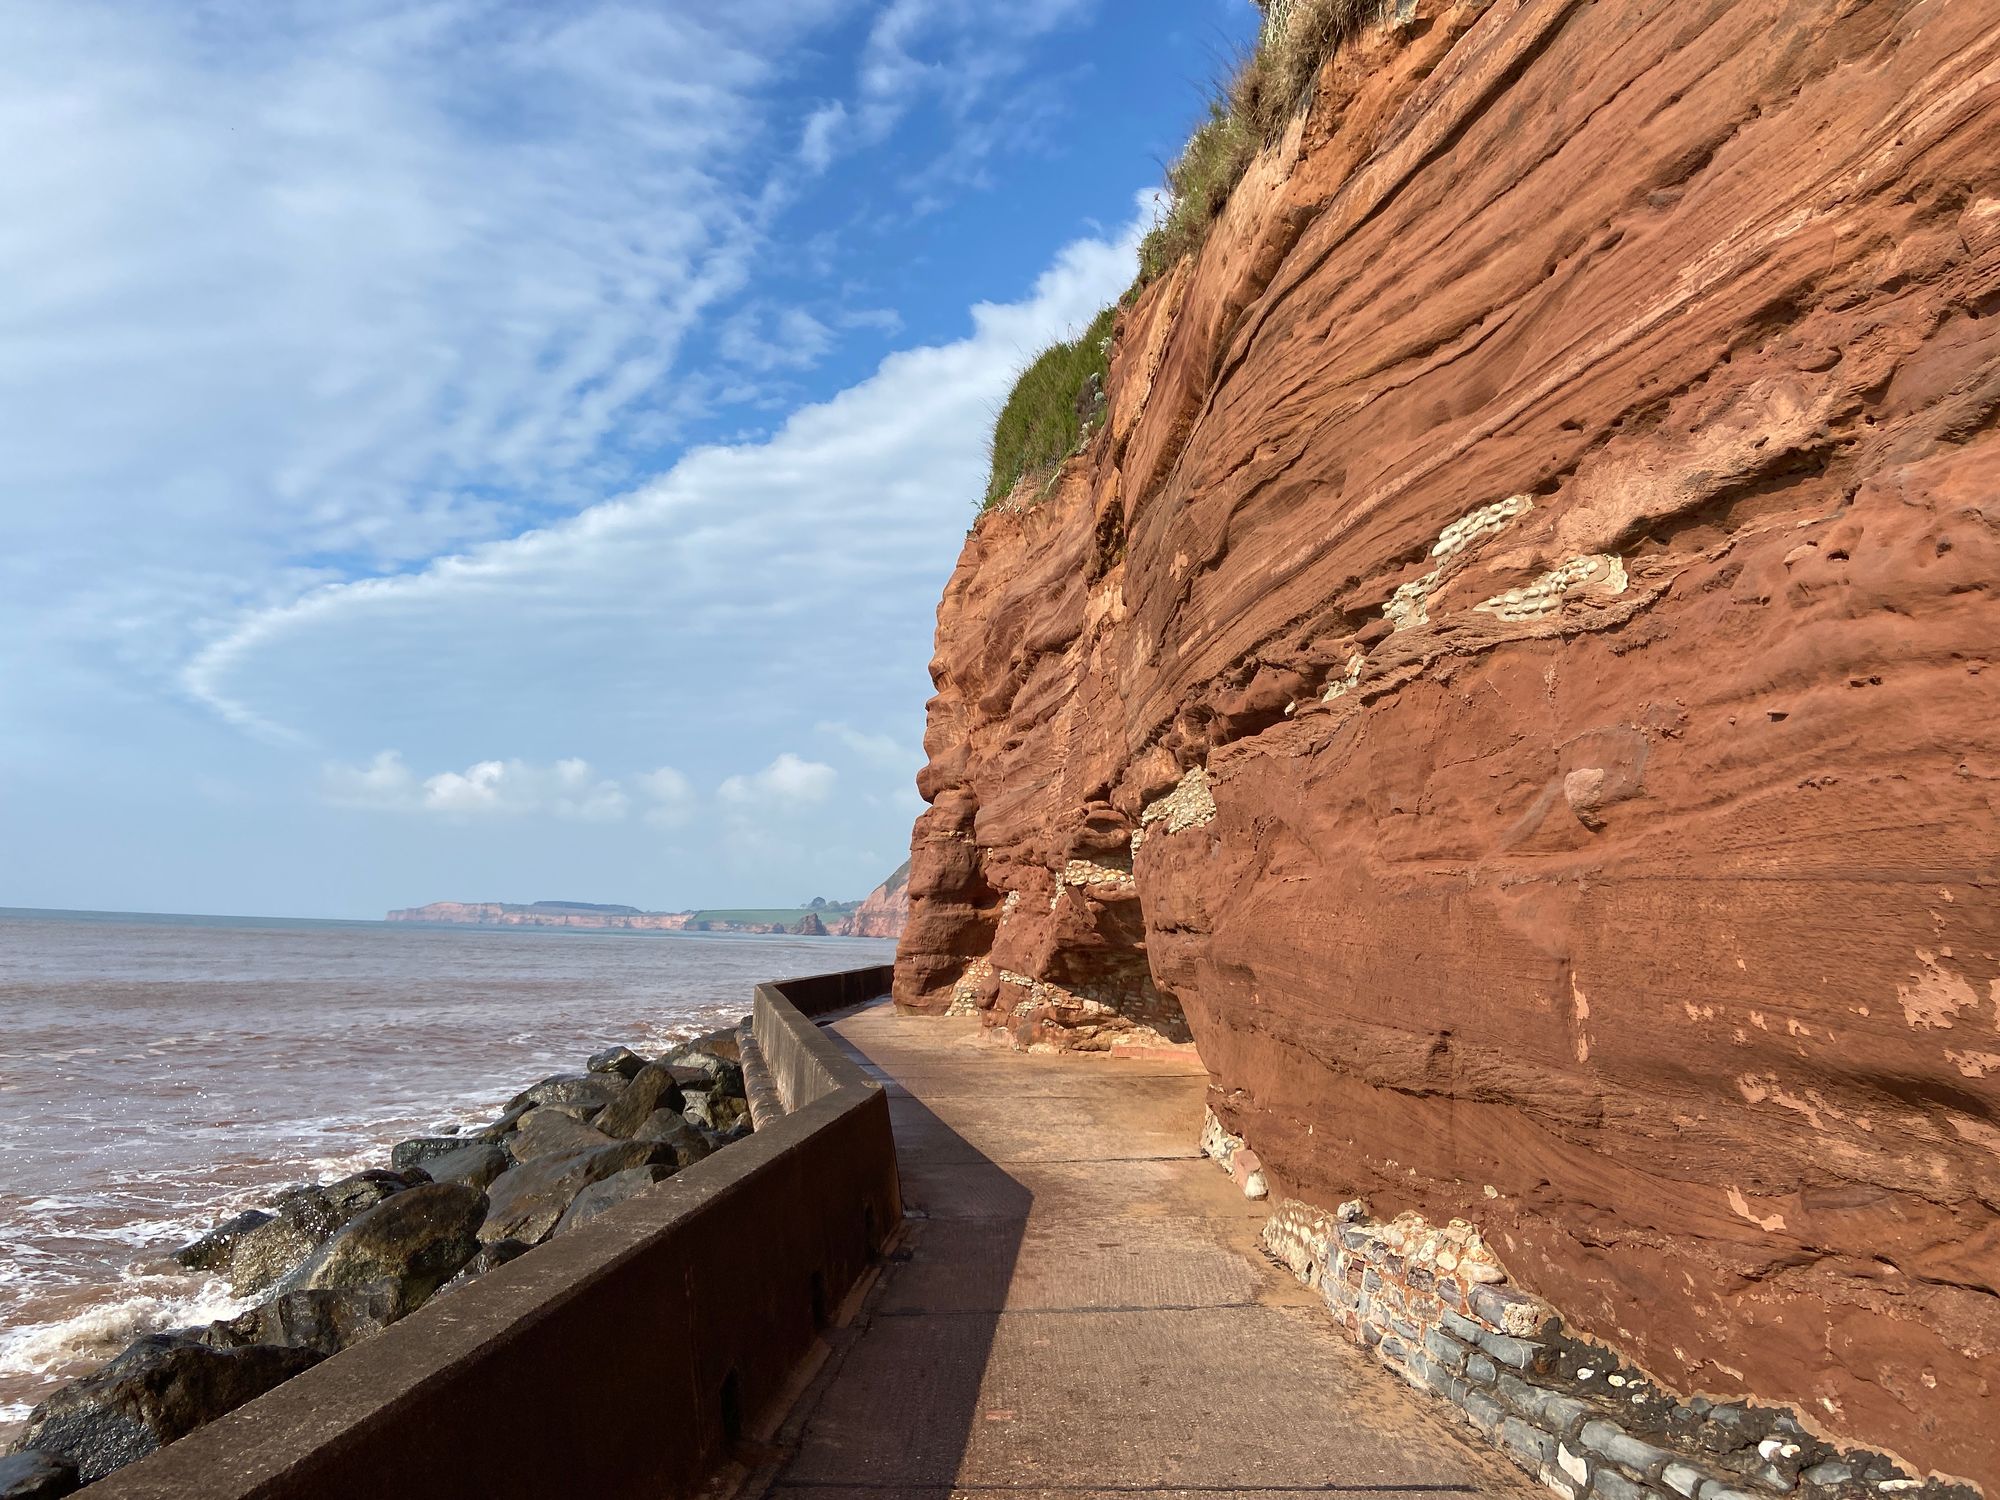 Saturday Blueprint on the Sidmouth Saunter